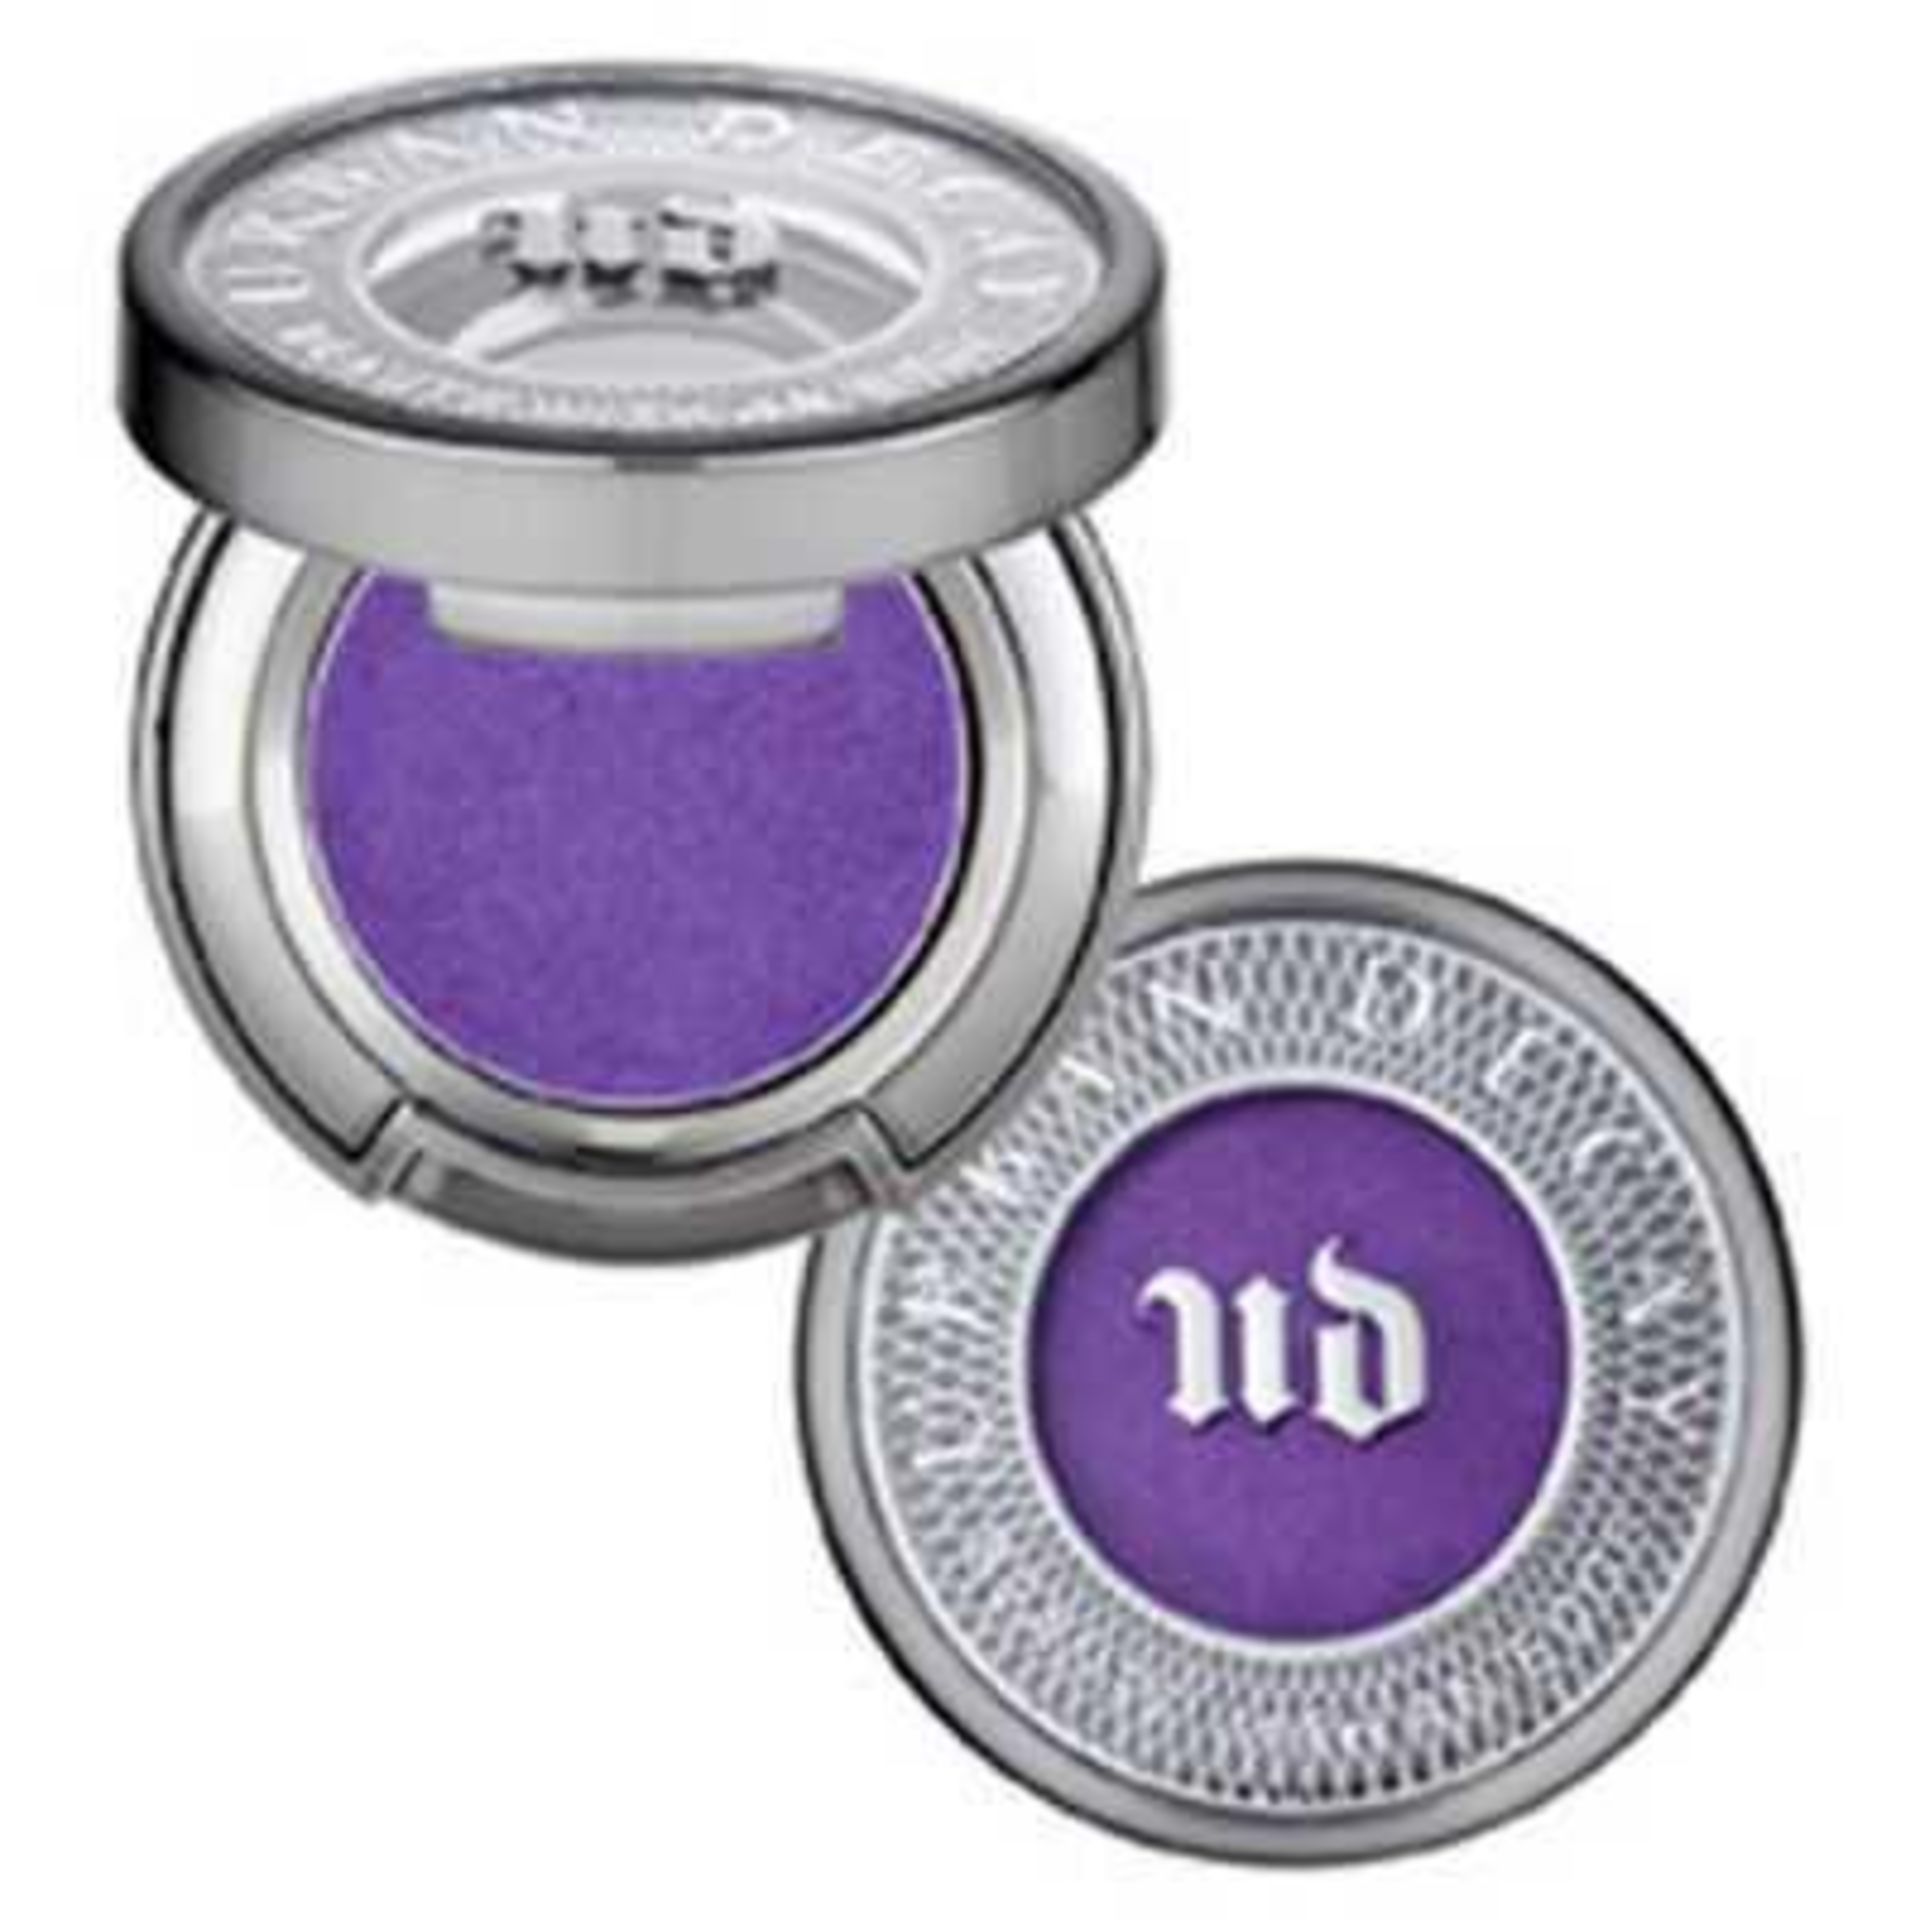 RRP £100 Lot To Contain 5 Brand New Boxed Unused Testers Of Urban Decay Eyeshadows 1.5 G Each - Image 3 of 5